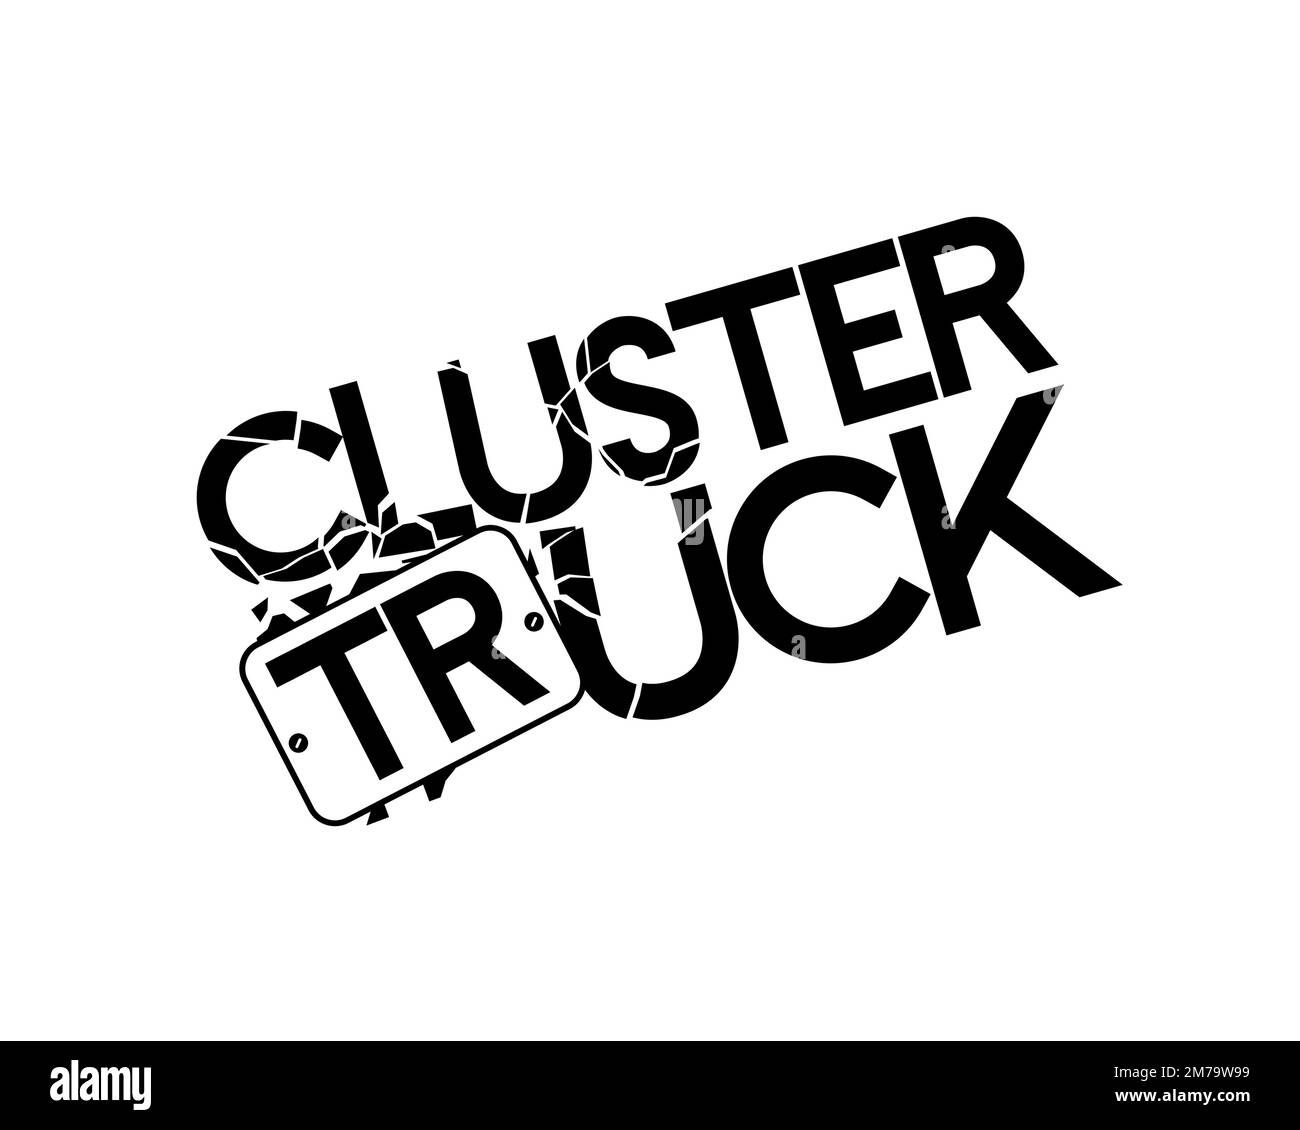 Cluster truck, rotated logo, white background Stock Photo